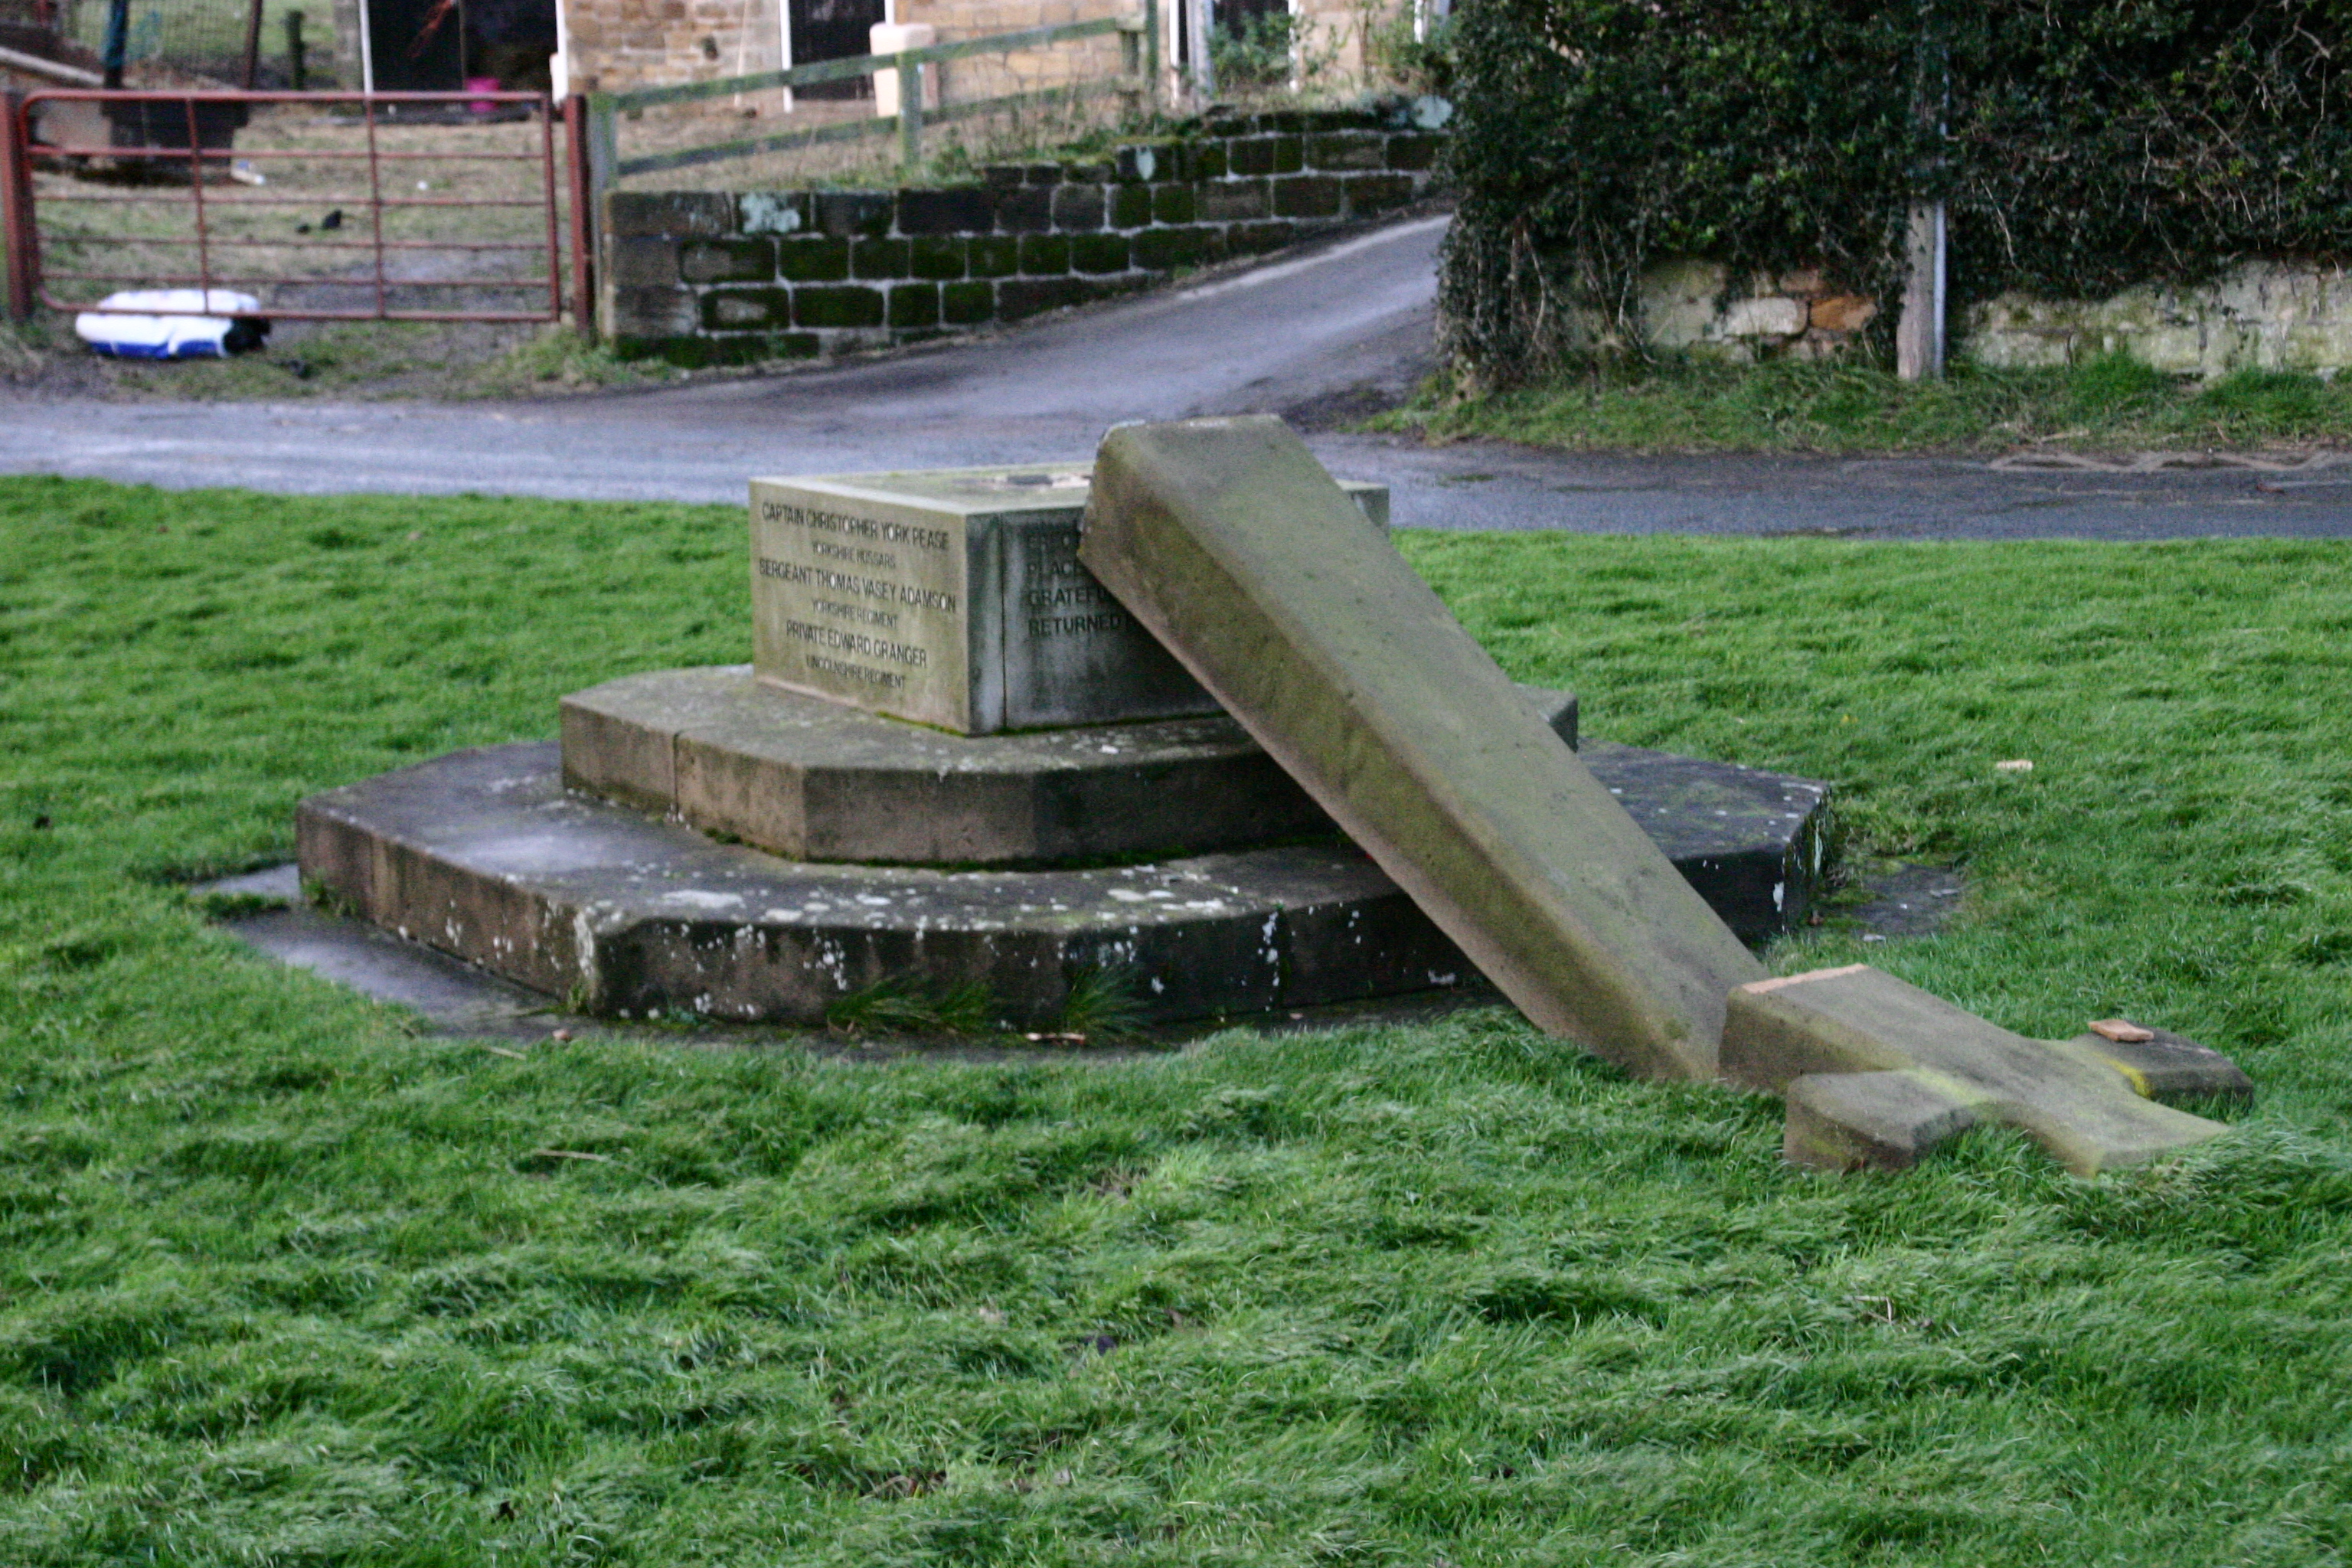 Ingleby Cross War Memorial Toppled over laying on the grass